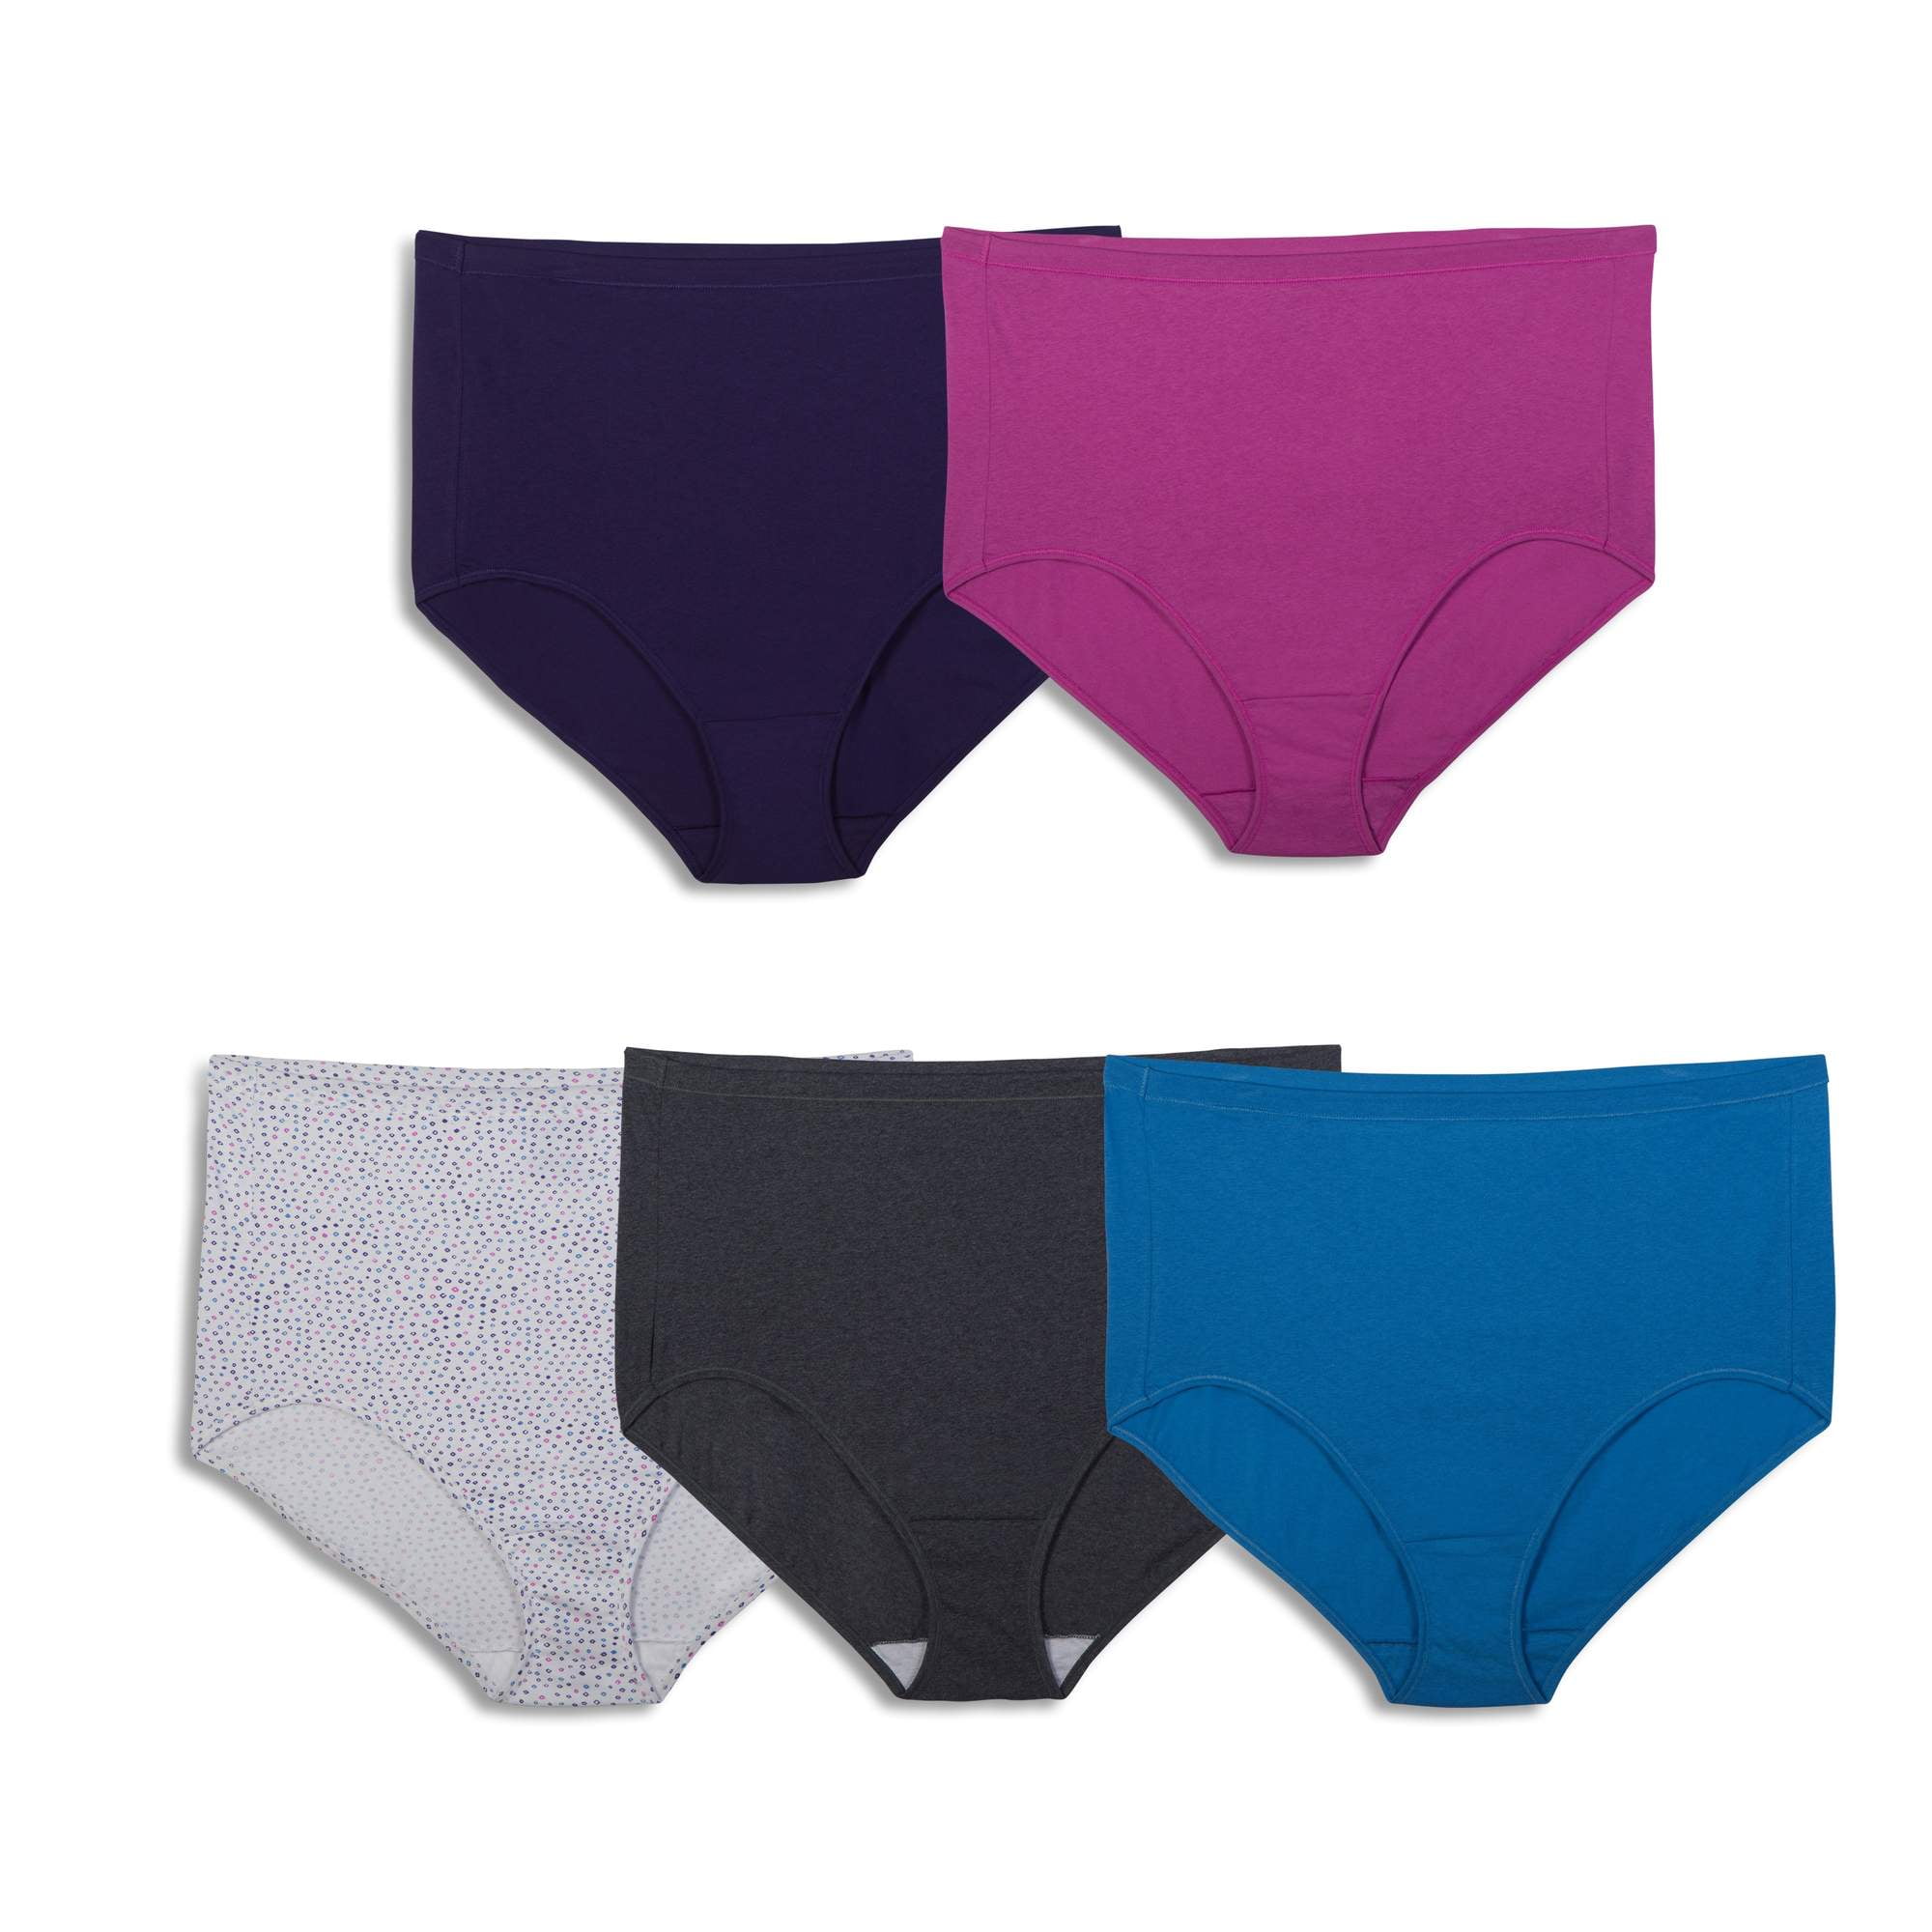 Women's Plus Comfort Covered Cotton Assorted Brief Panties - 5 Pack ...